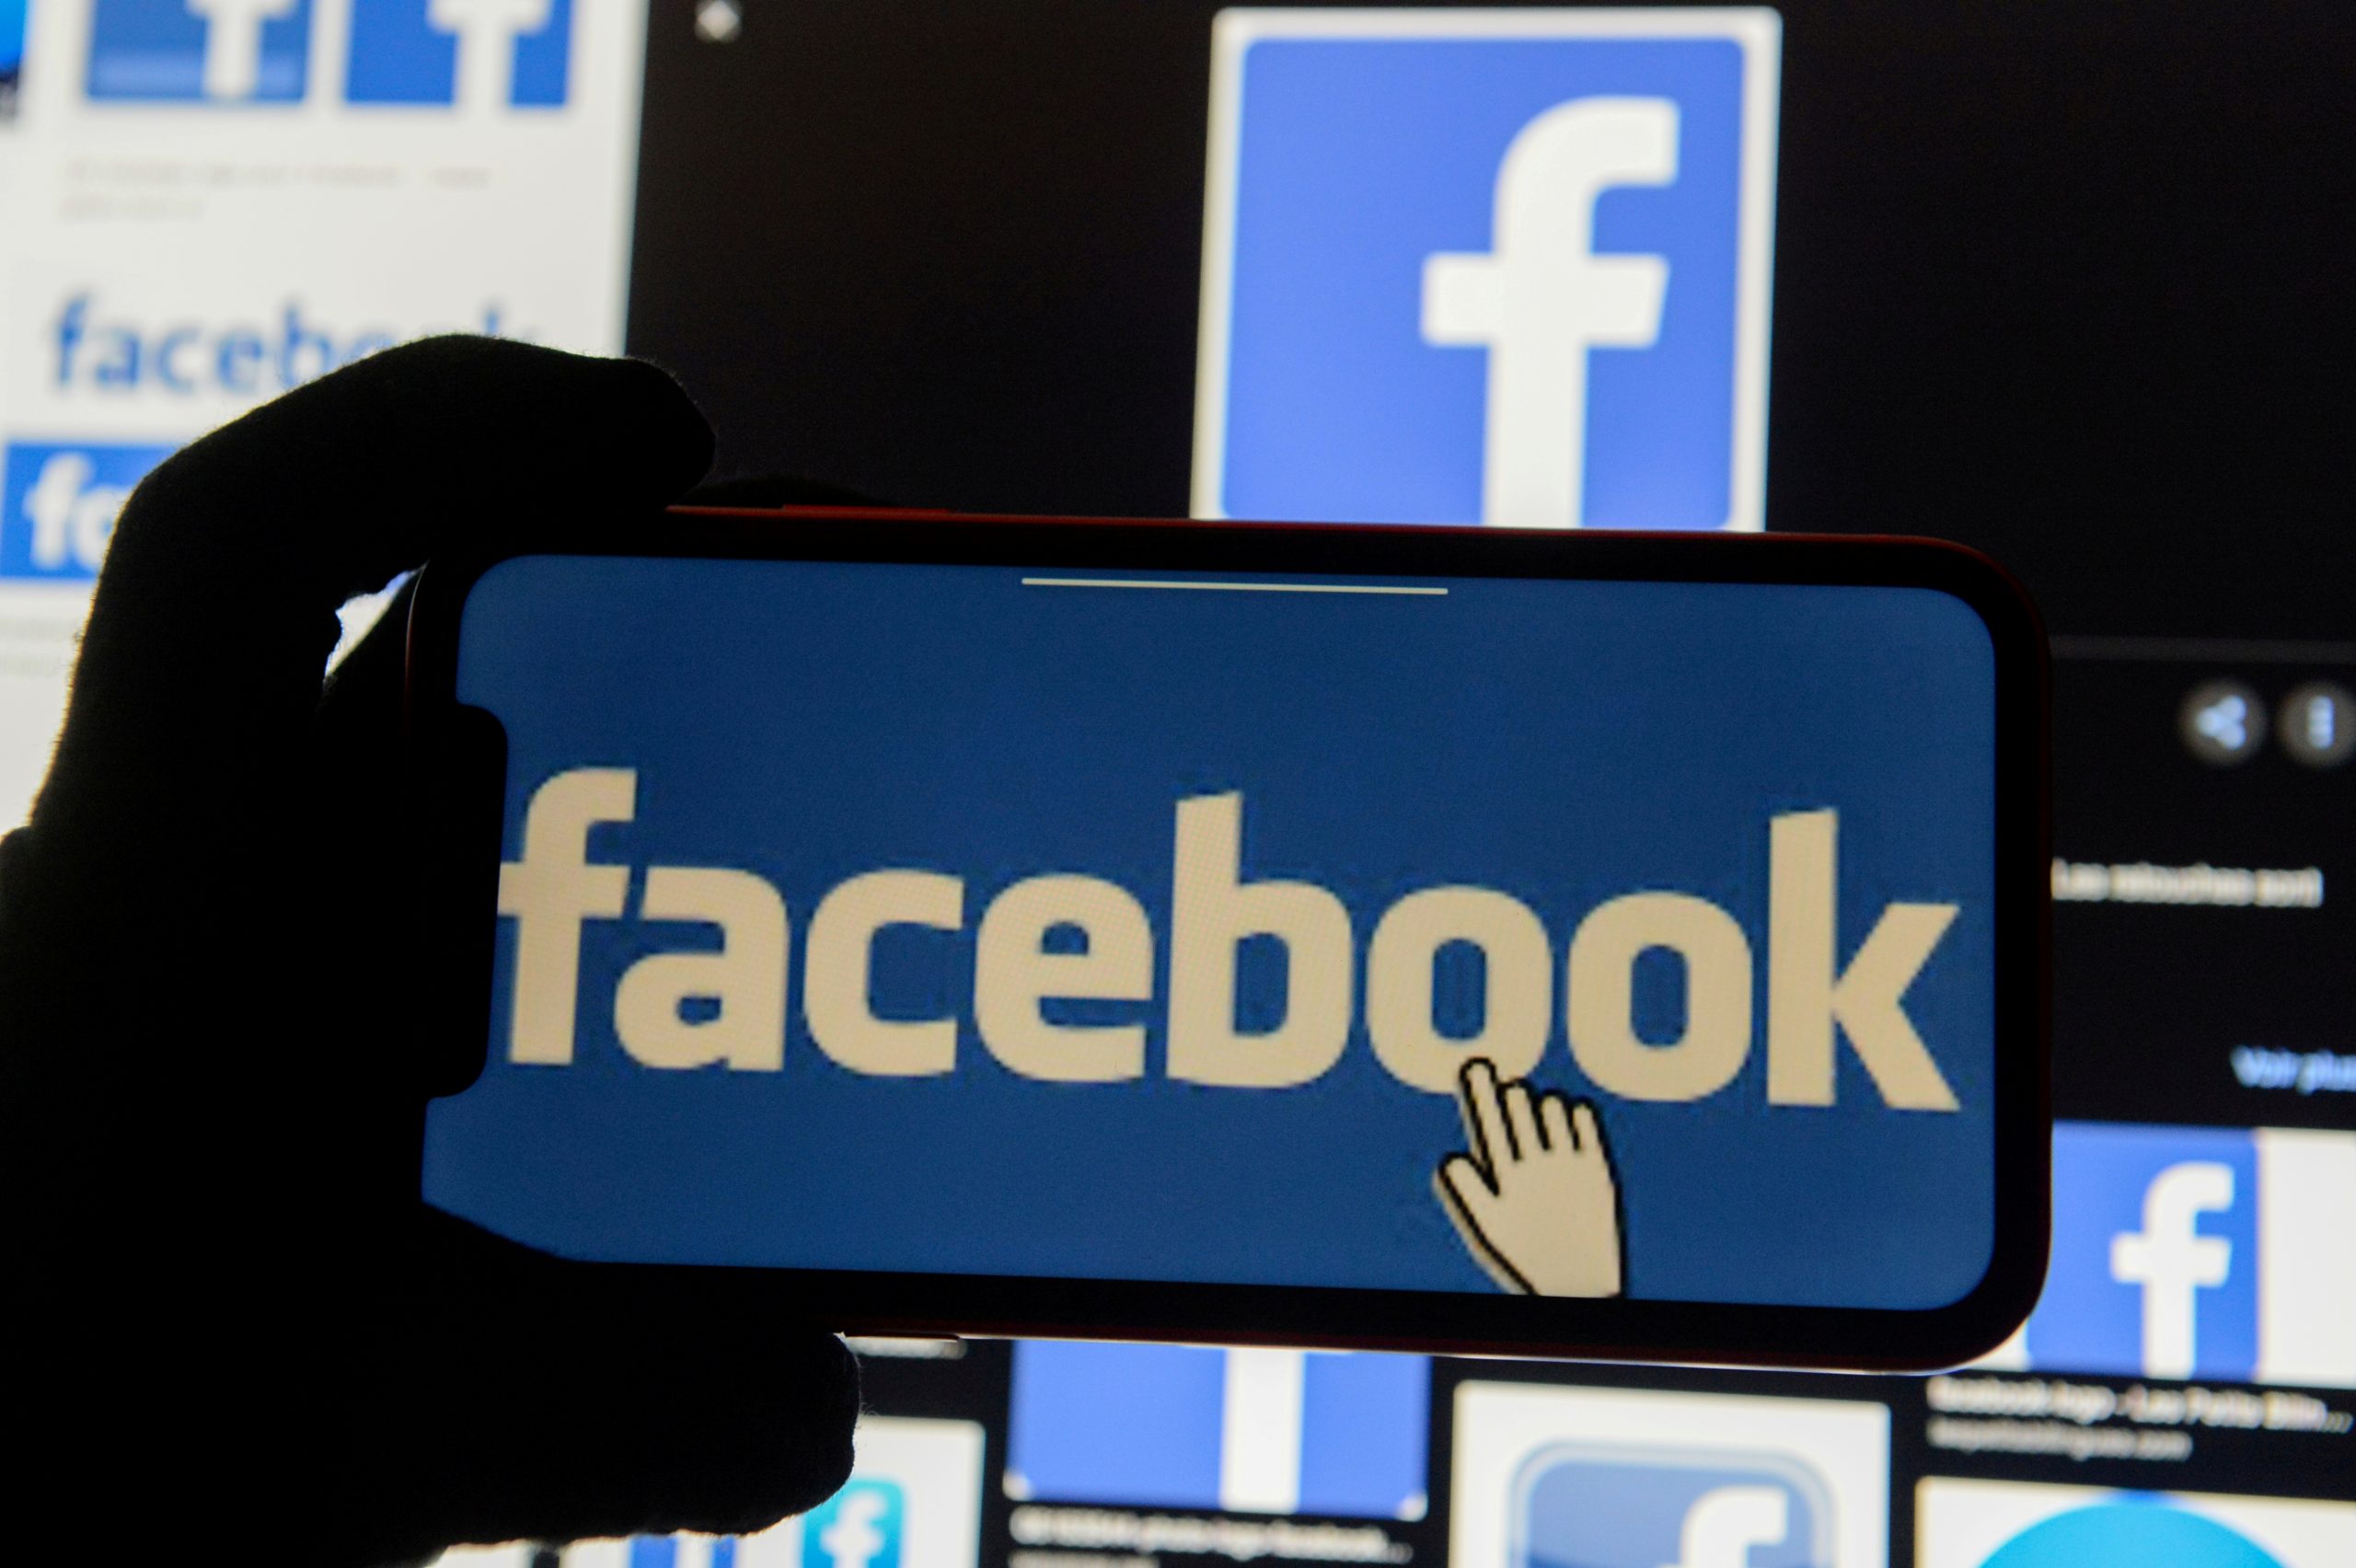 FILE PHOTO: Facebook logos FILE PHOTO: The Facebook logo is displayed on a mobile phone in this picture illustration taken December 2, 2019. REUTERS/Johanna Geron/Illustration/File Photo JOHANNA GERON